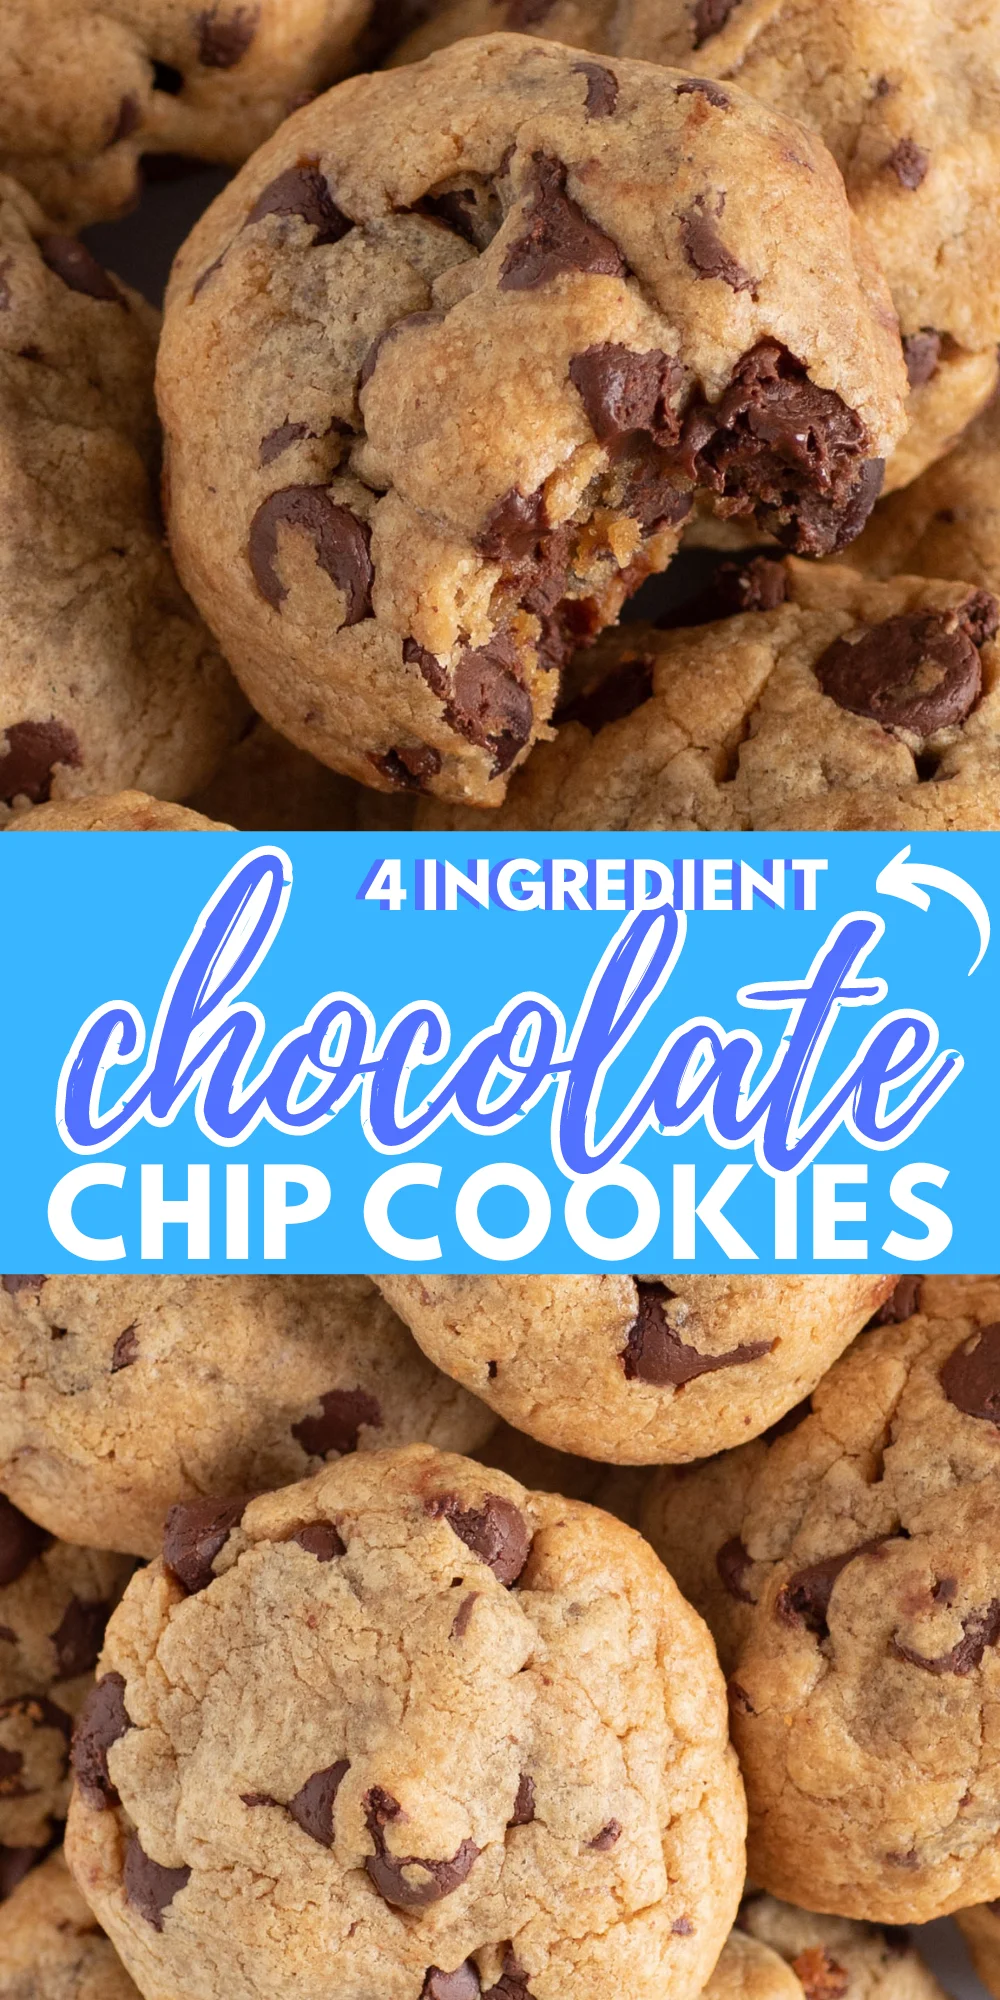 4 ingredient chocolate chip cookies promotional image for pinterest